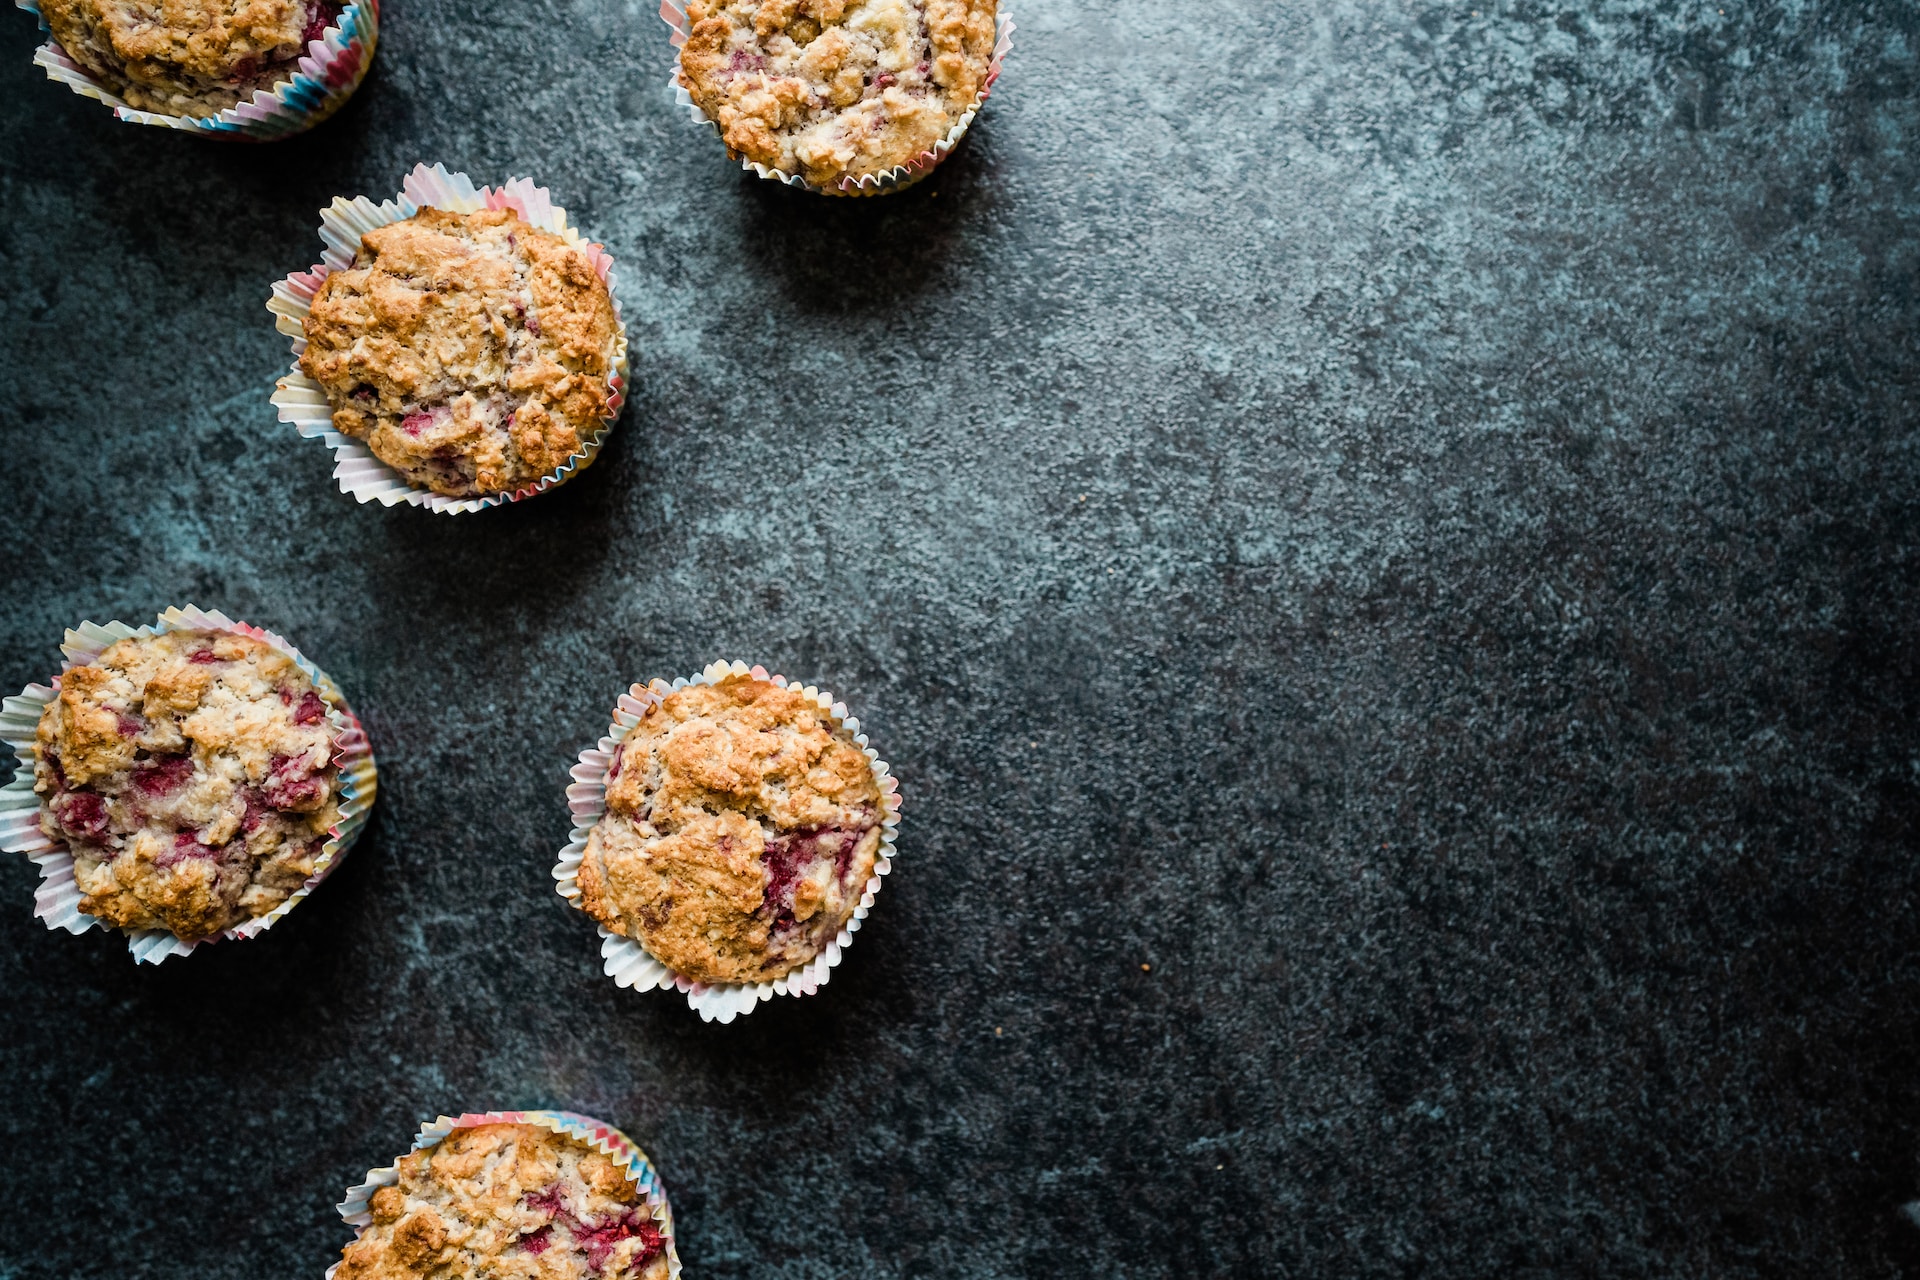 For a quick muffin recipe, just grab a mug and mix 1/4 cup of flour, 2 tablespoons of sugar, 1/4 teaspoon of baking powder, 3 tablespoons of milk, 1 tablespoon of melted butter, a handful of raspberries, and white chocolate chips. Microwave for 1-2 minutes and you'll end up with a fruity, chocolatey muffin you won't believe came out of the microwave.